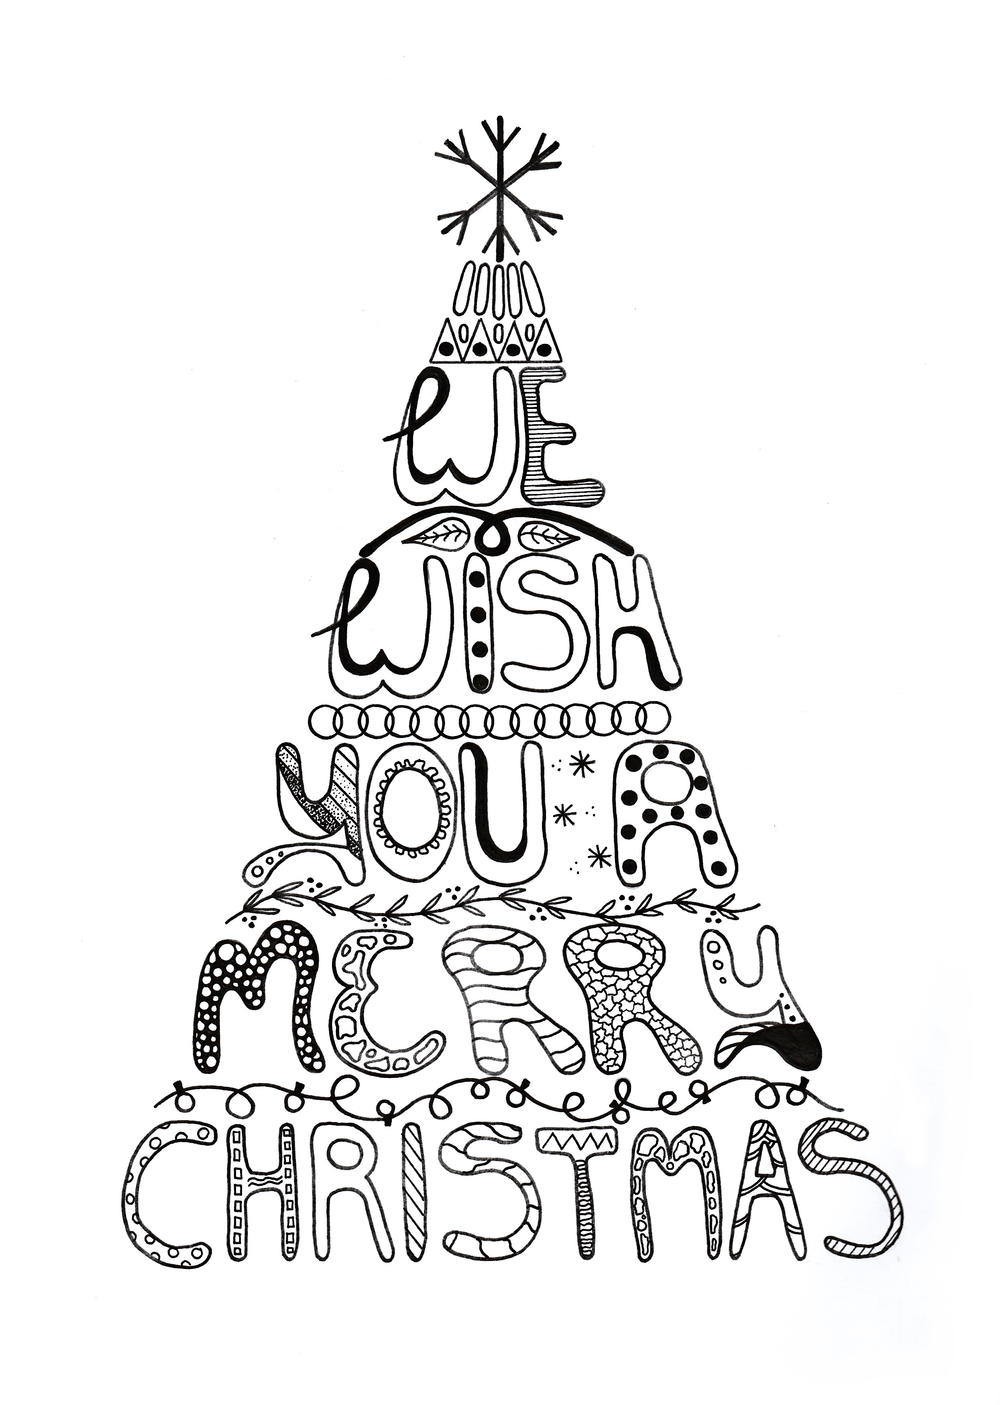 Merry Christmas Adult Coloring Page jpeg Extra 1000 ID v=